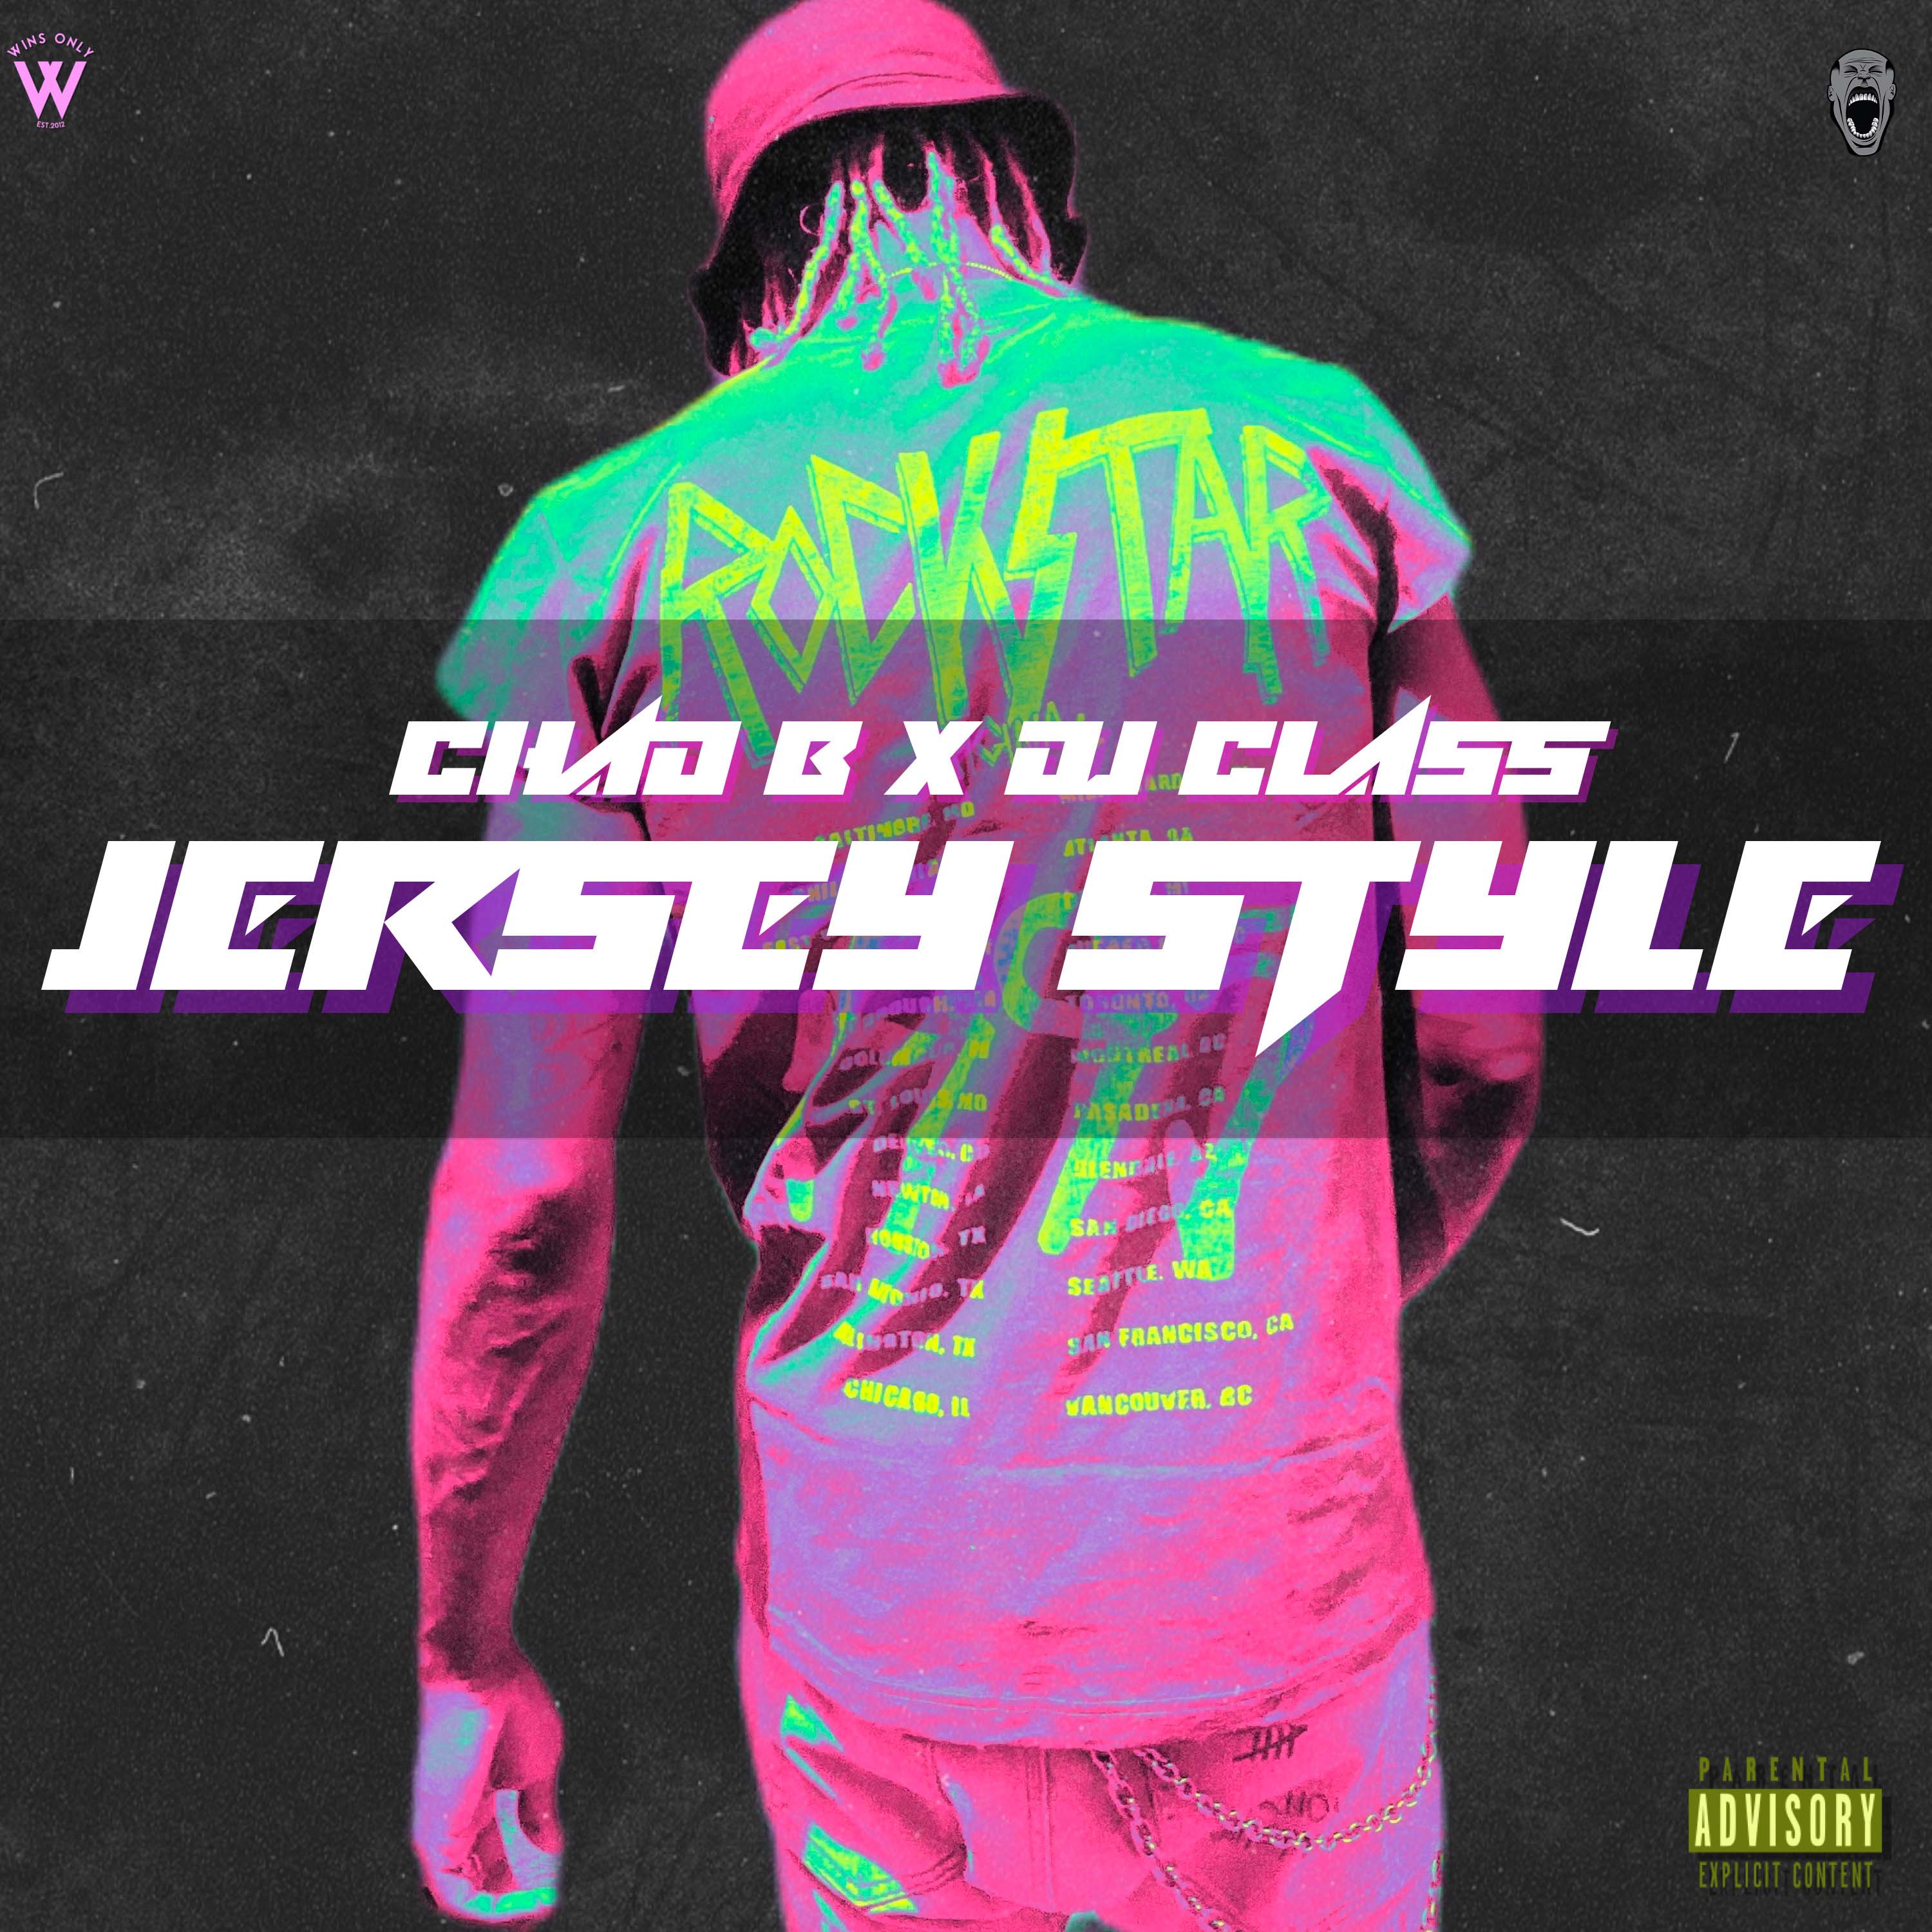 Art for Jersey Style (Clean Short Edit) by Chad B ft DJ Class